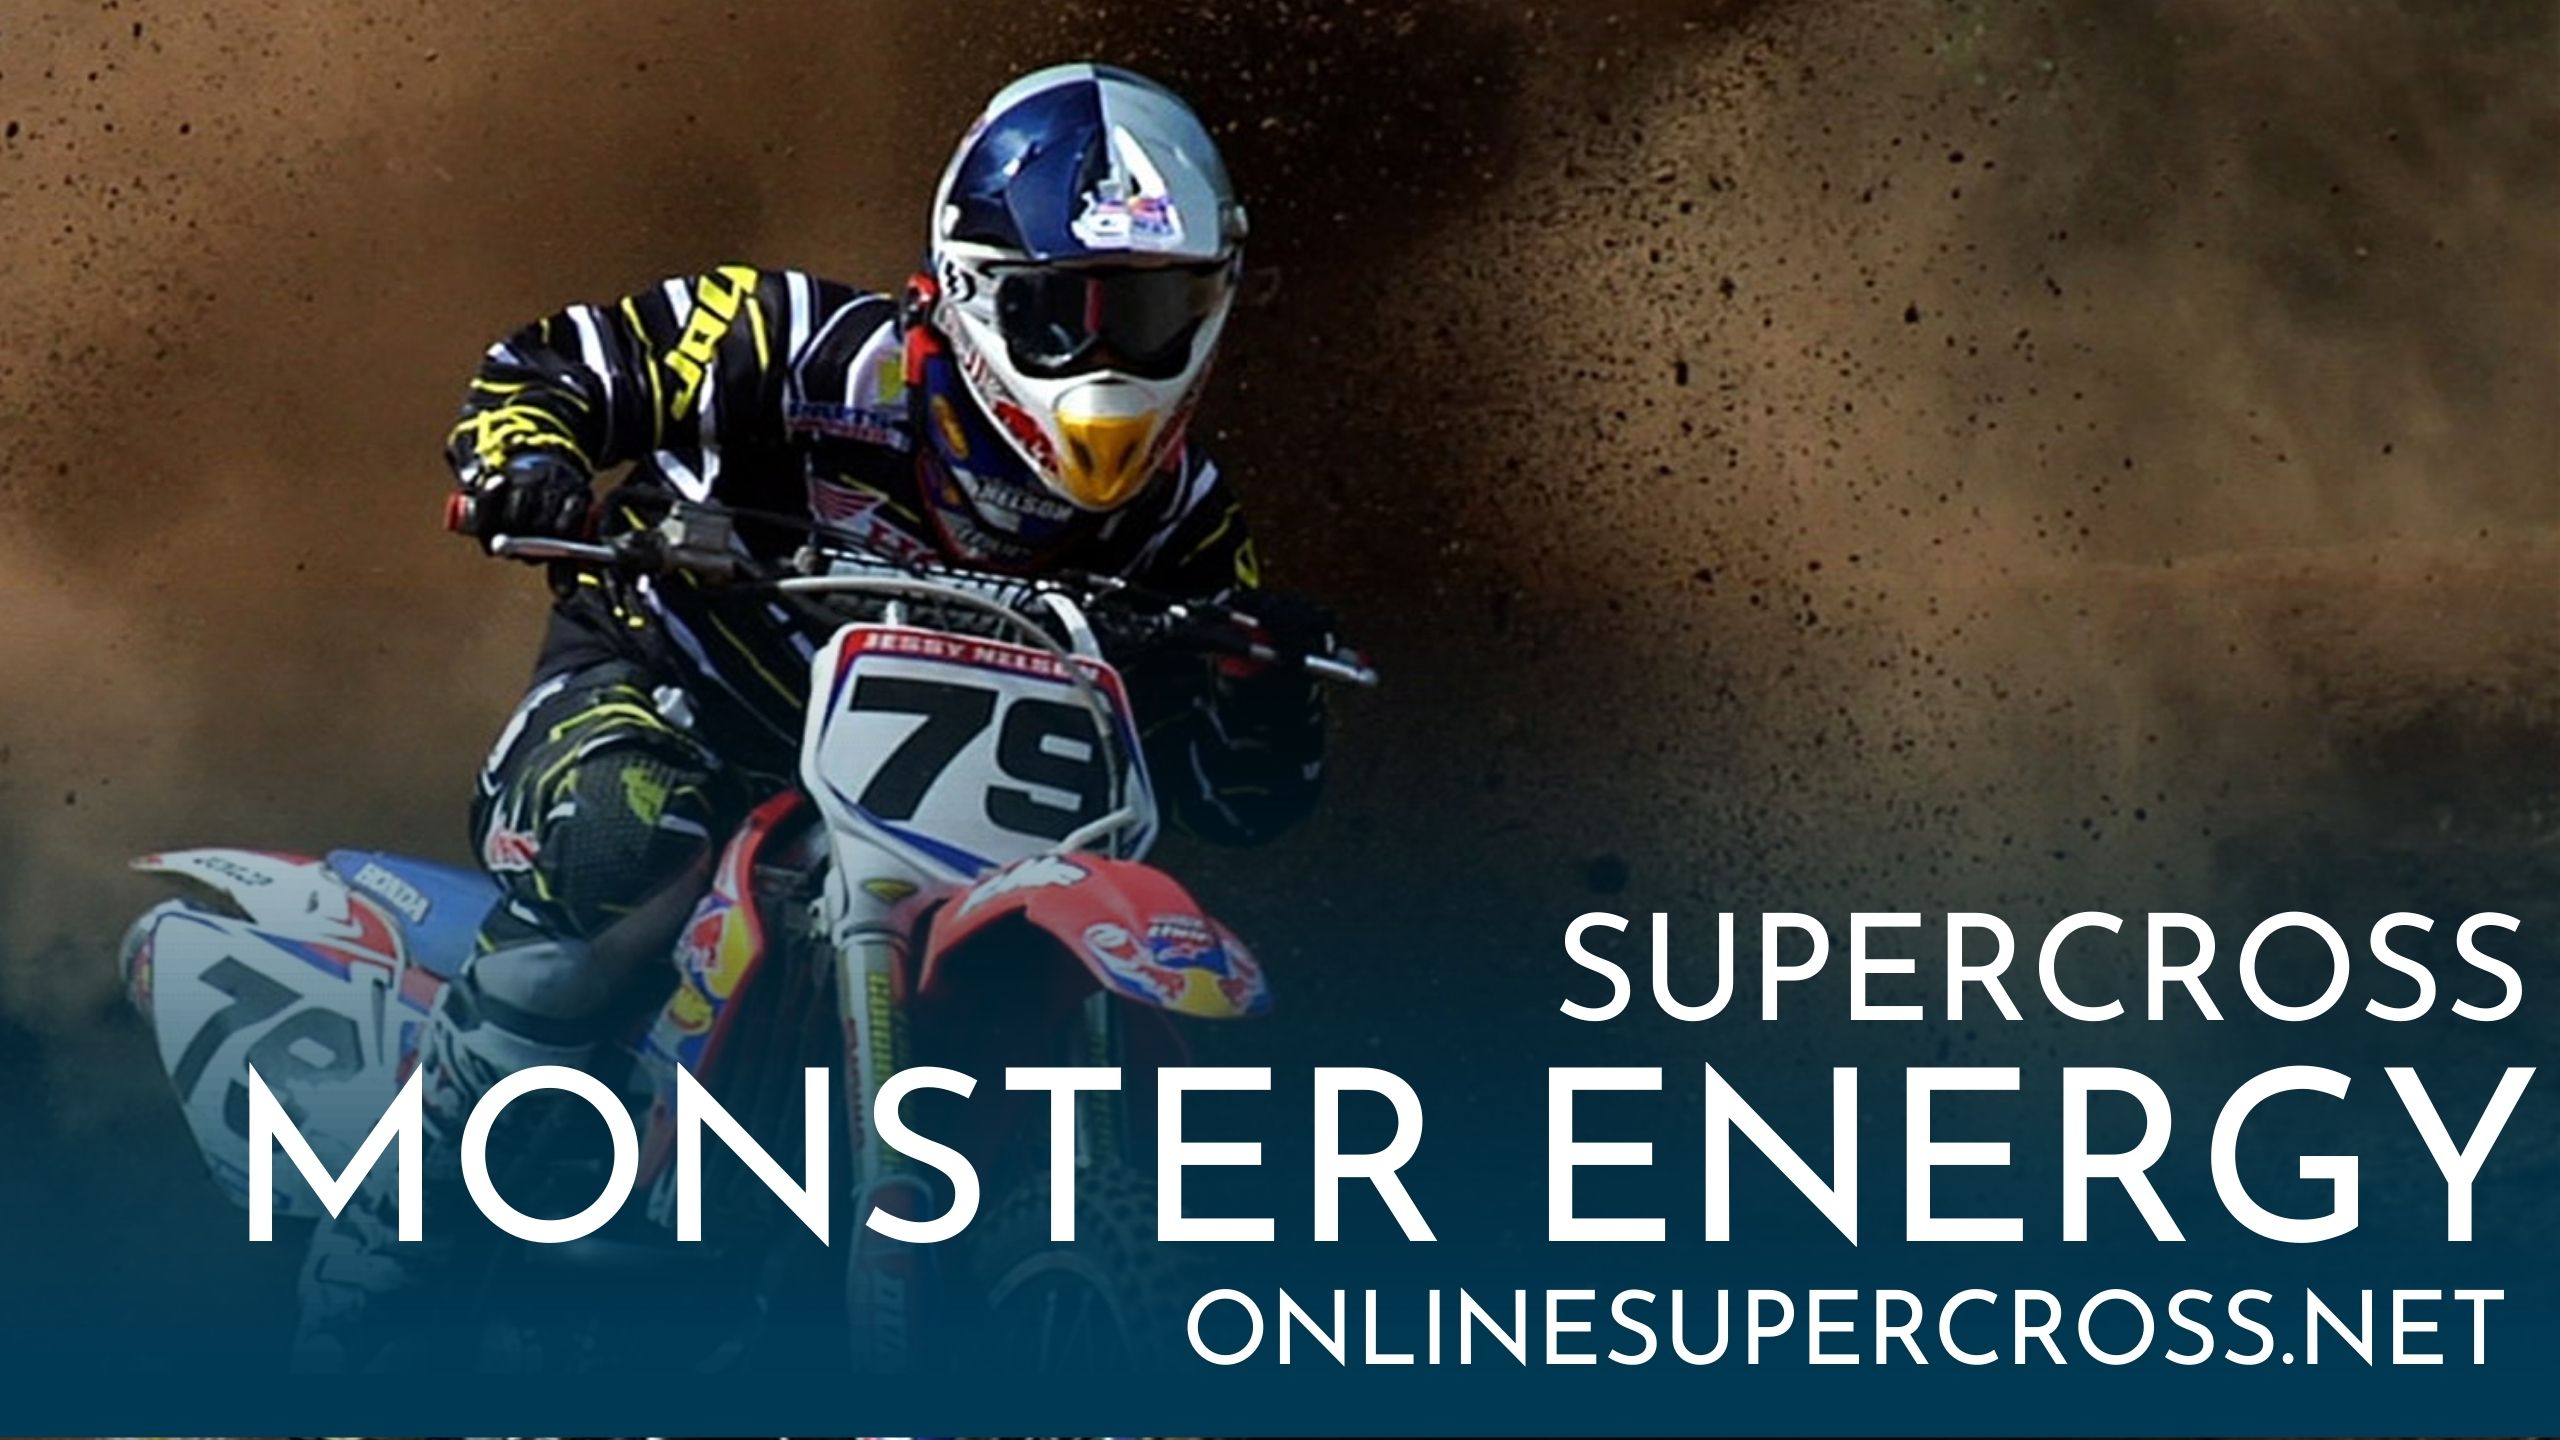 Watch Monster Energy AMA Supercross at Petco Park 2015 Online